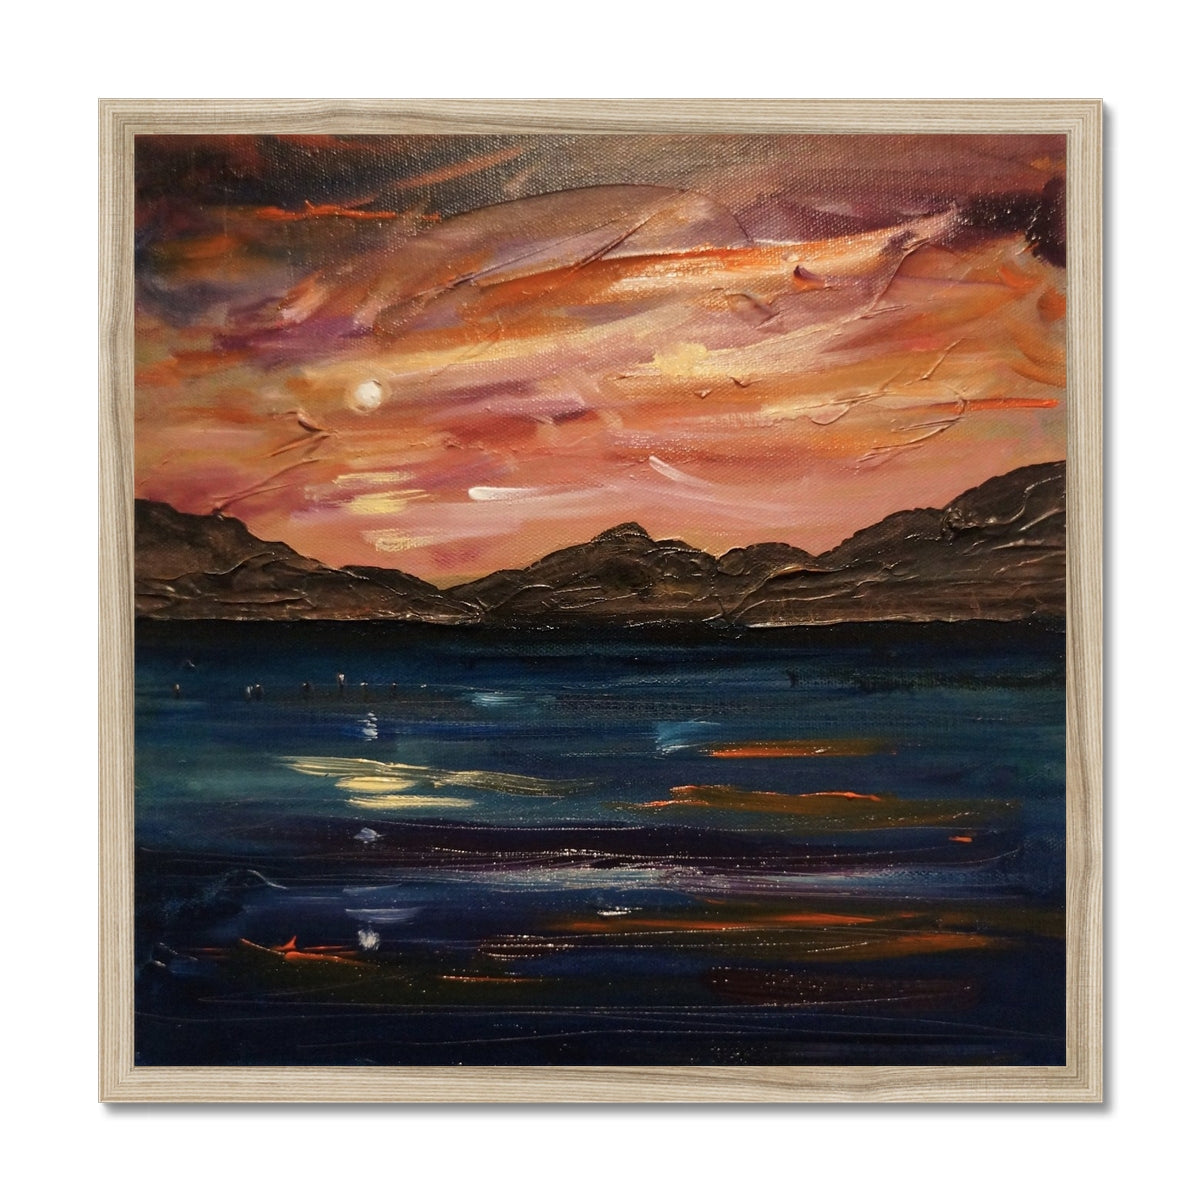 Loch Ness Moonset Painting | Framed Prints From Scotland-Framed Prints-Scottish Lochs & Mountains Art Gallery-20"x20"-Natural Frame-Paintings, Prints, Homeware, Art Gifts From Scotland By Scottish Artist Kevin Hunter